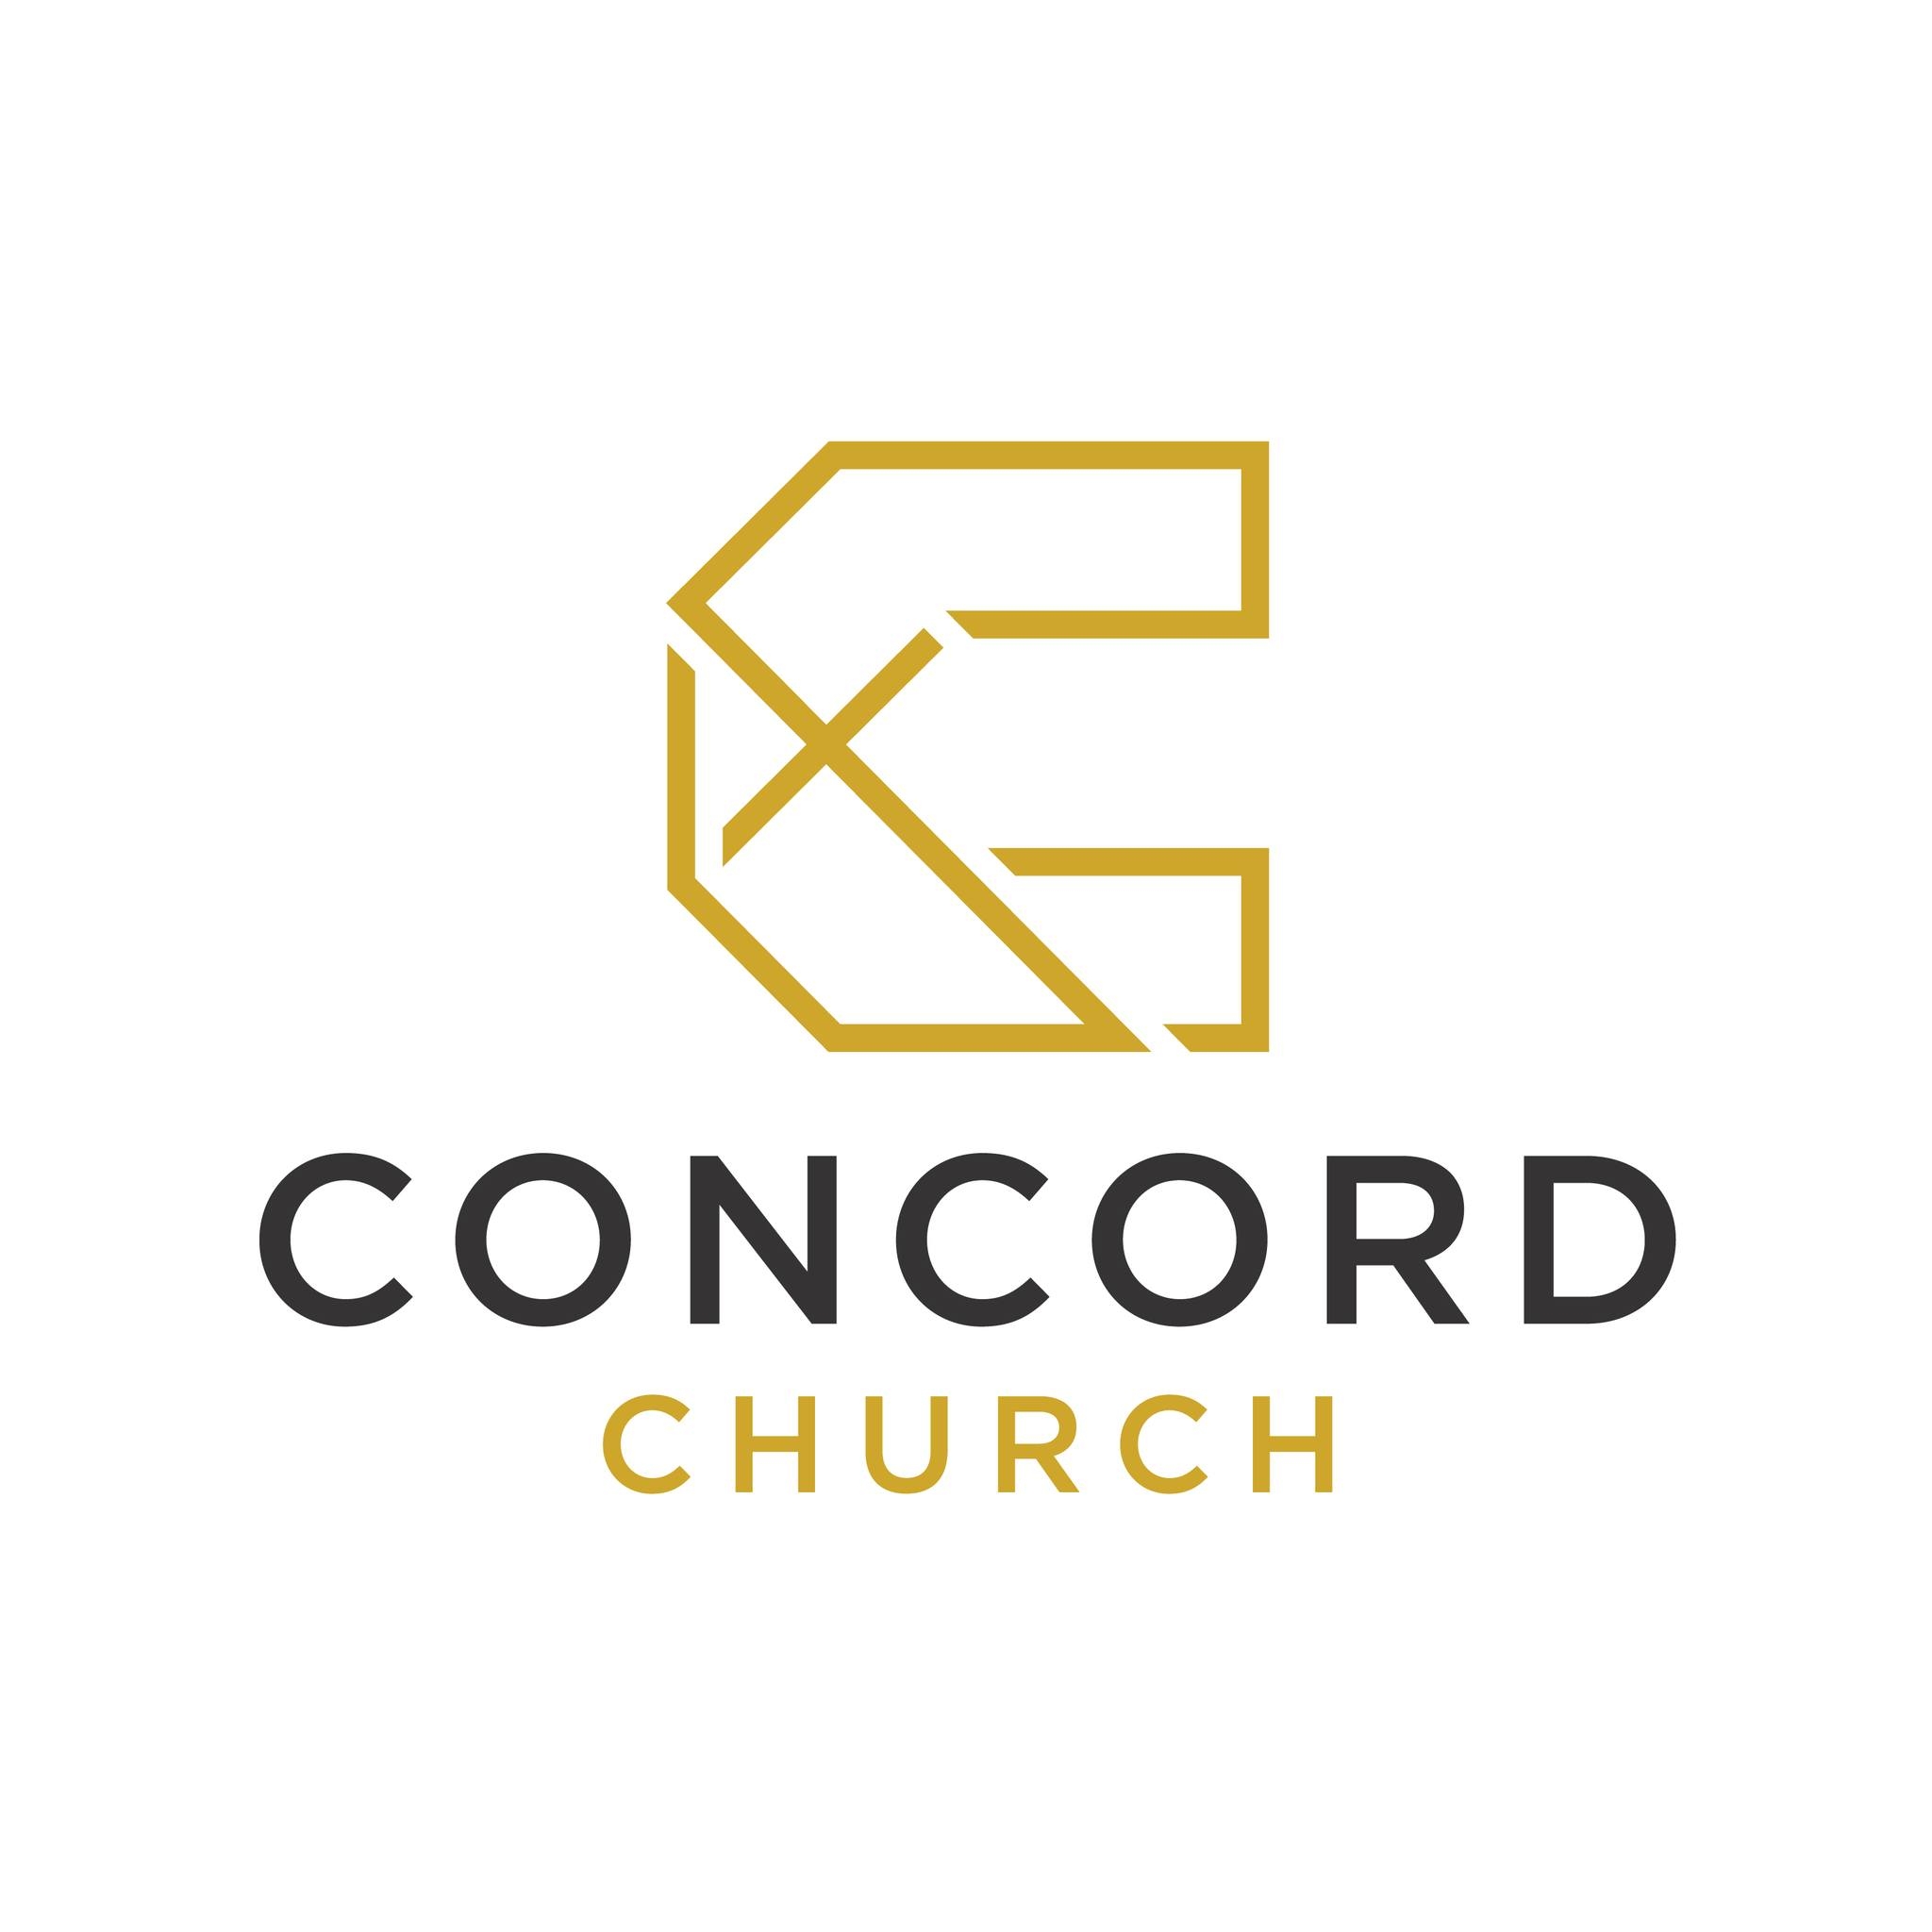 Concord Church- Daily Bread Food Pantry